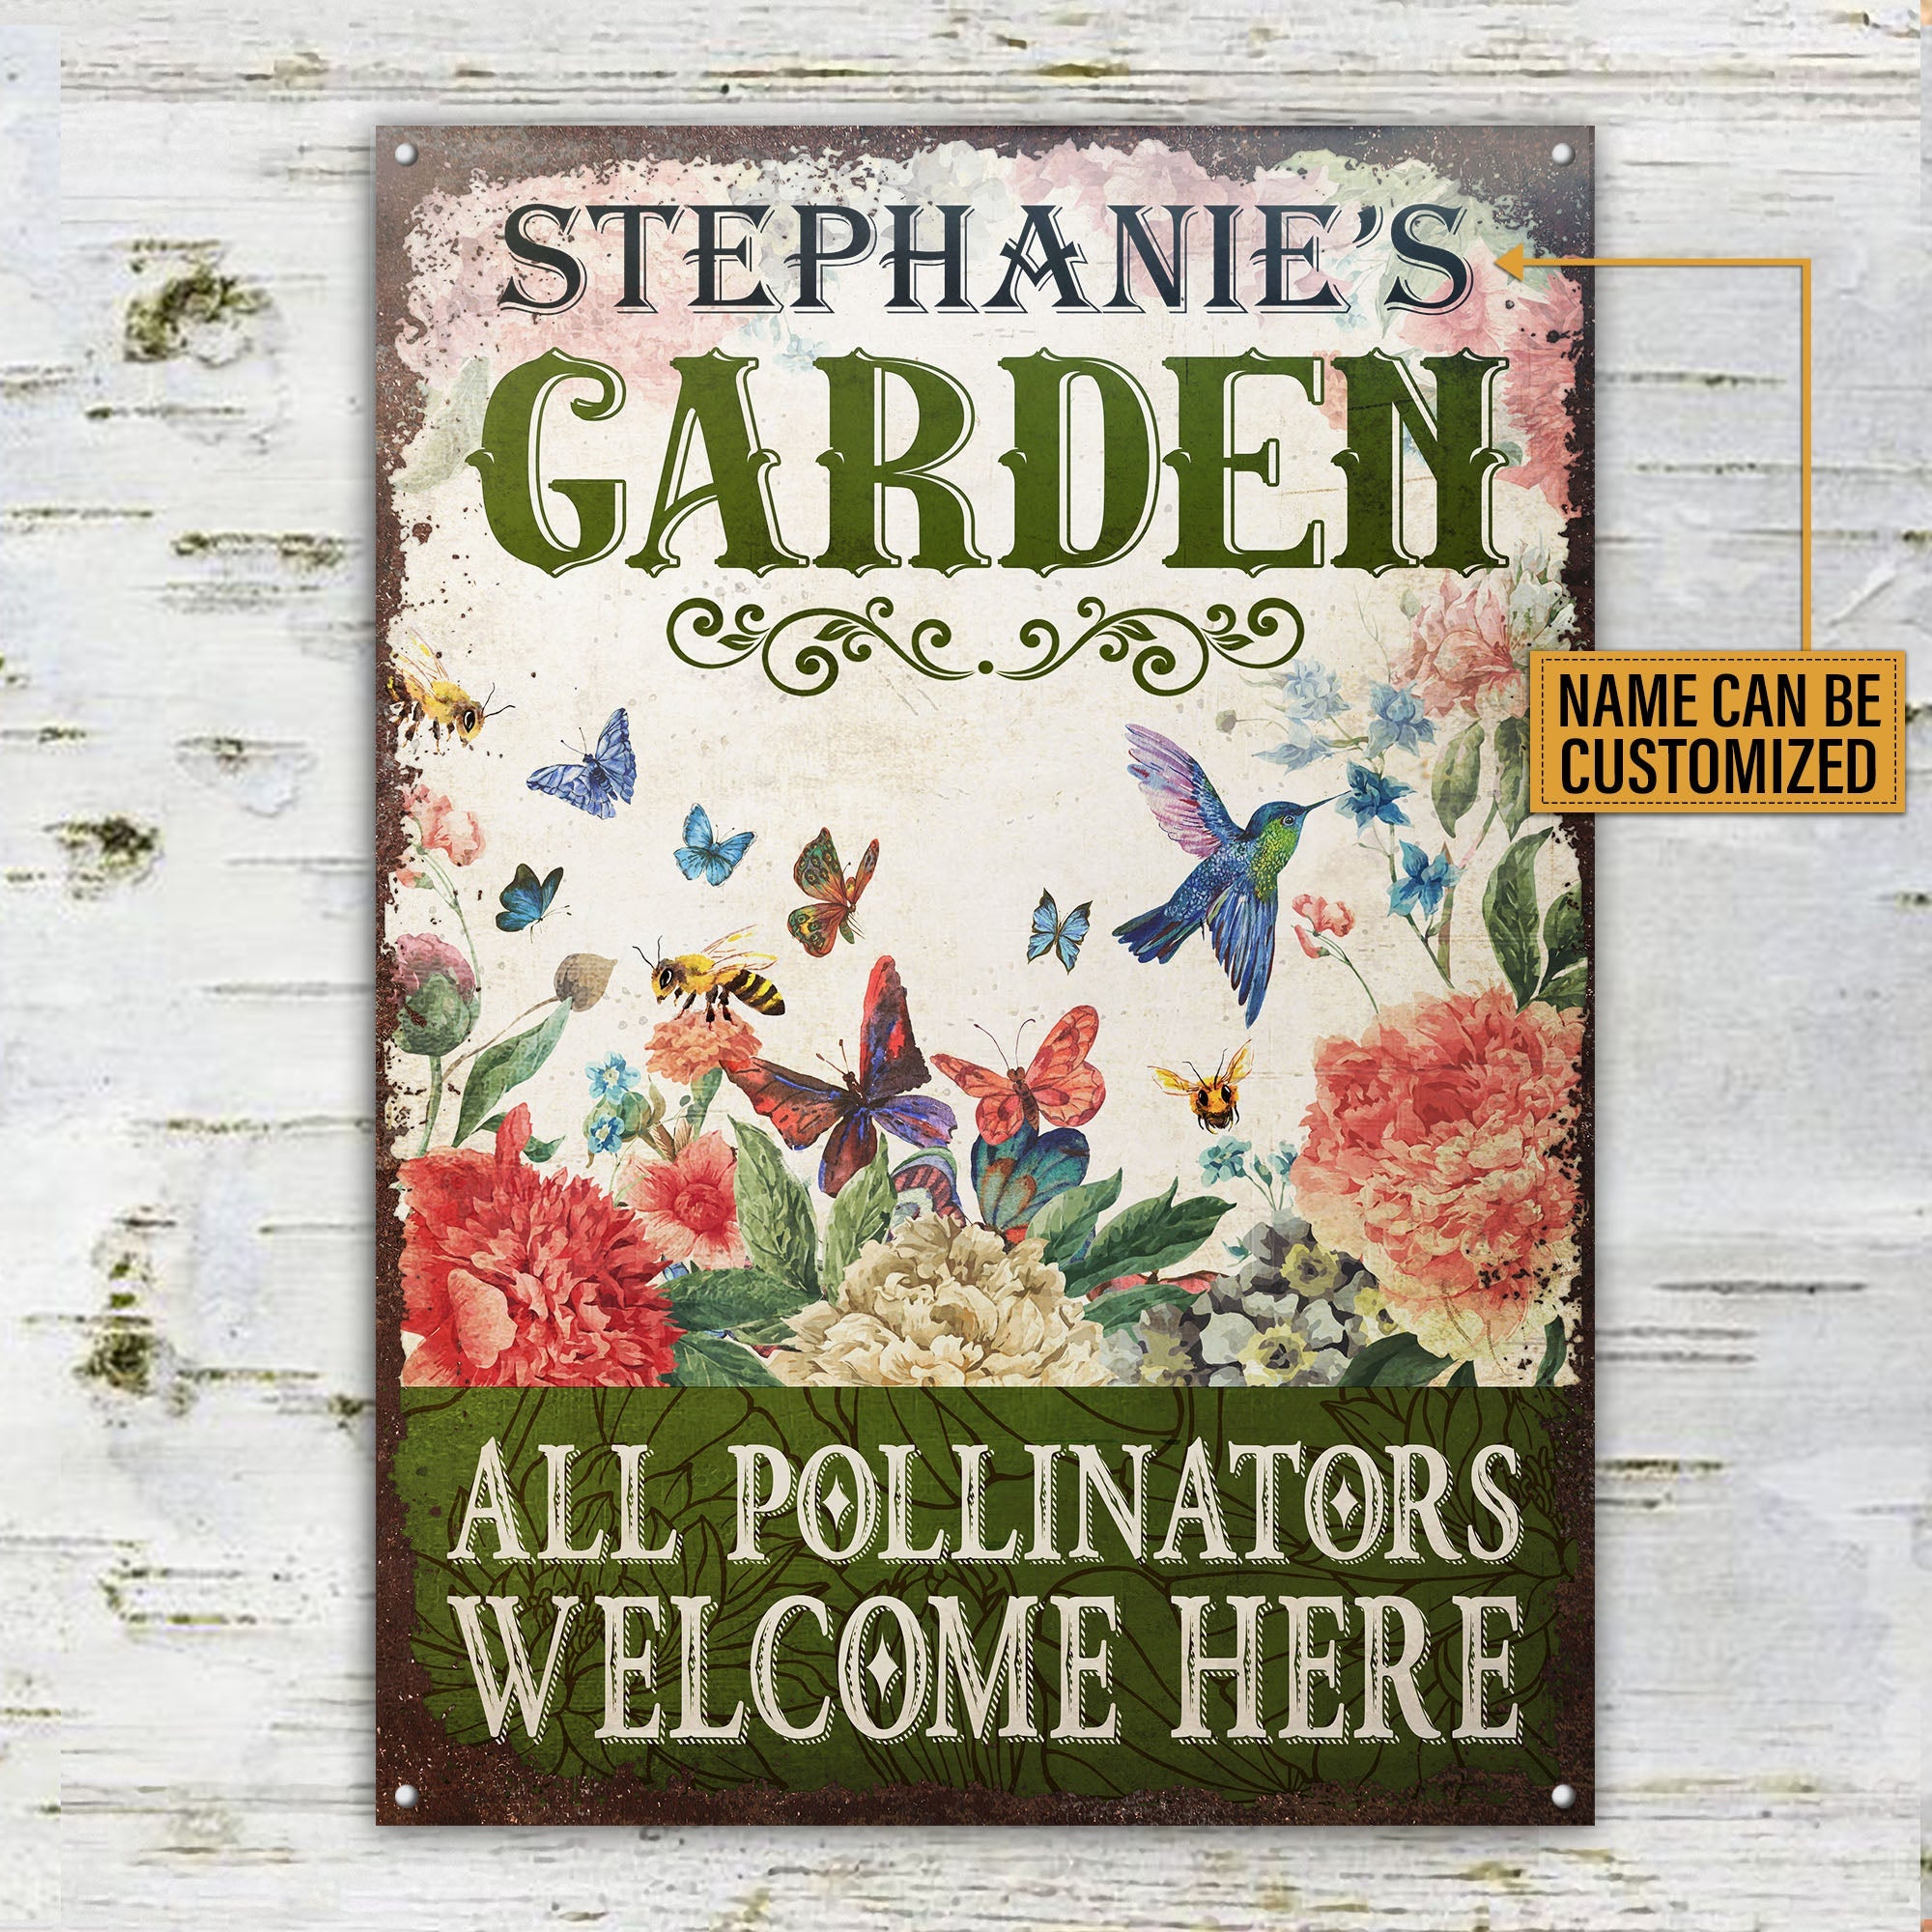 USA MADE Customized Personalized Garden Pollinators Welcome Customized Classic Metal Signs